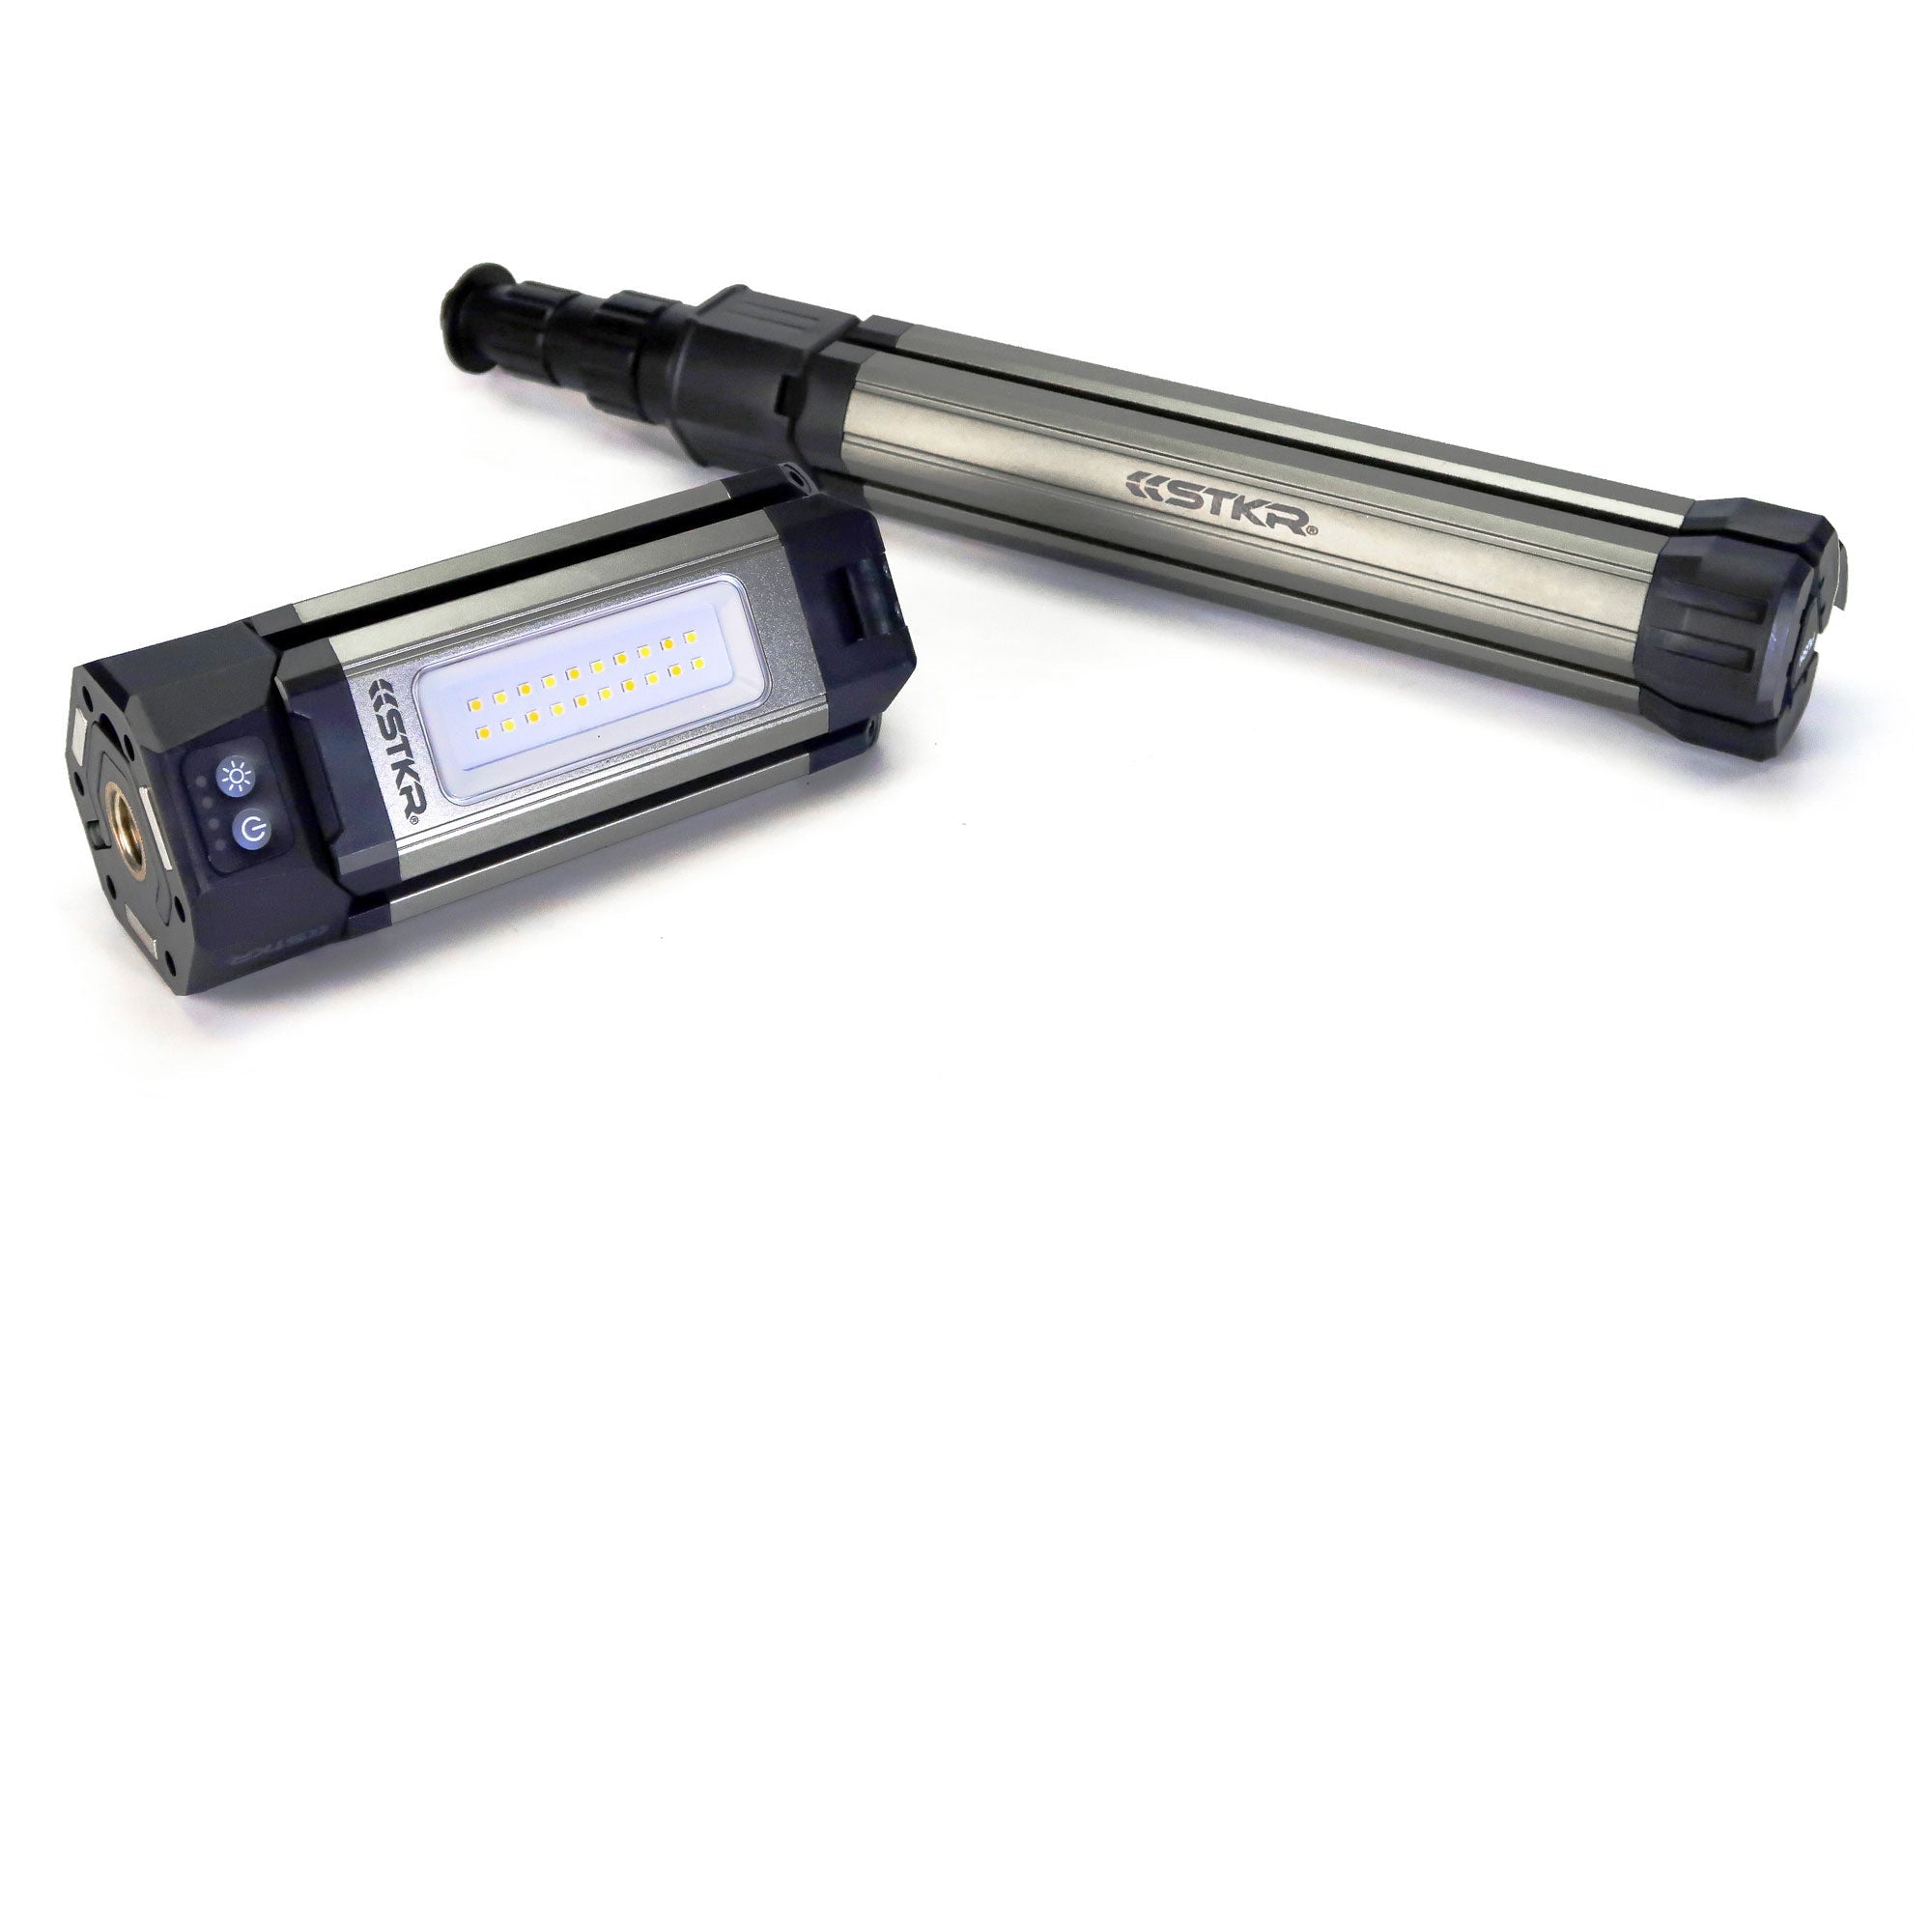 TRi-Mobile Area Work Light - Rechargeable Shoplight with Triple Pivoting LED Light Heads by STKR Concepts - standing up